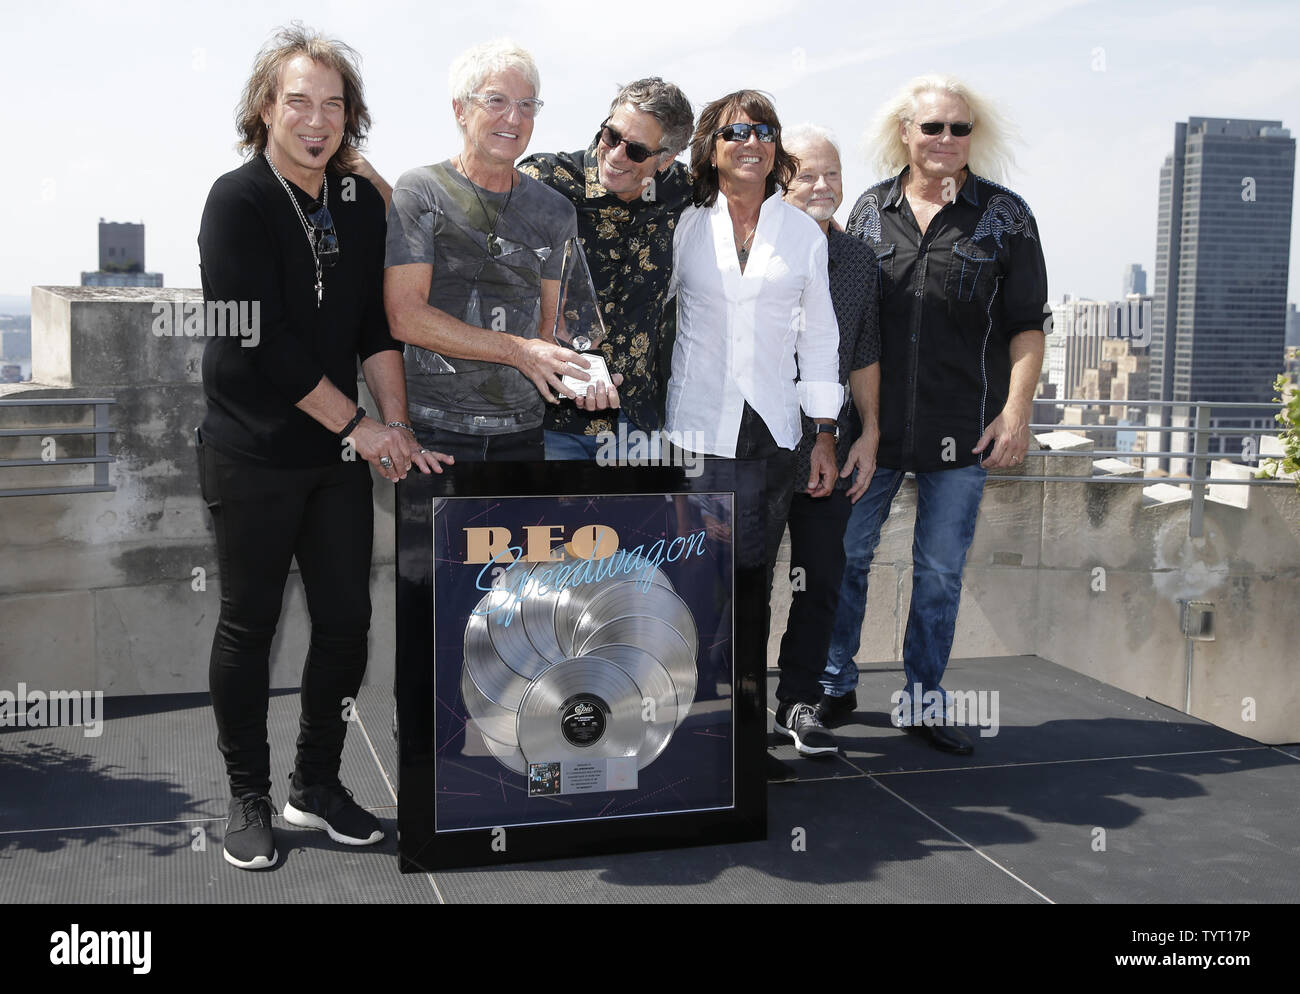 Dave Amato, Kevin Cronin, Mark Goodman, Bryan Hitt, Neal Doughty and Bruce Hall of REO Speedwagon stand on the Sony Music rooftop when the 1980 album 'Hi Infidelity'  is awarded a Recording Industry Association of America RIAA 10X Diamond Award for surpassing 10 million units in the United States on August 17, 2017 in New York City. Hi Infidelity is the ninth studio album by the band REO Speedwagon, it was released on November 21, 1980. The album became a big hit in the United States peaking at number one on the Billboard 200 REO Speedwagon accepts the award from RIAA, Legacy Recordings and So Stock Photo